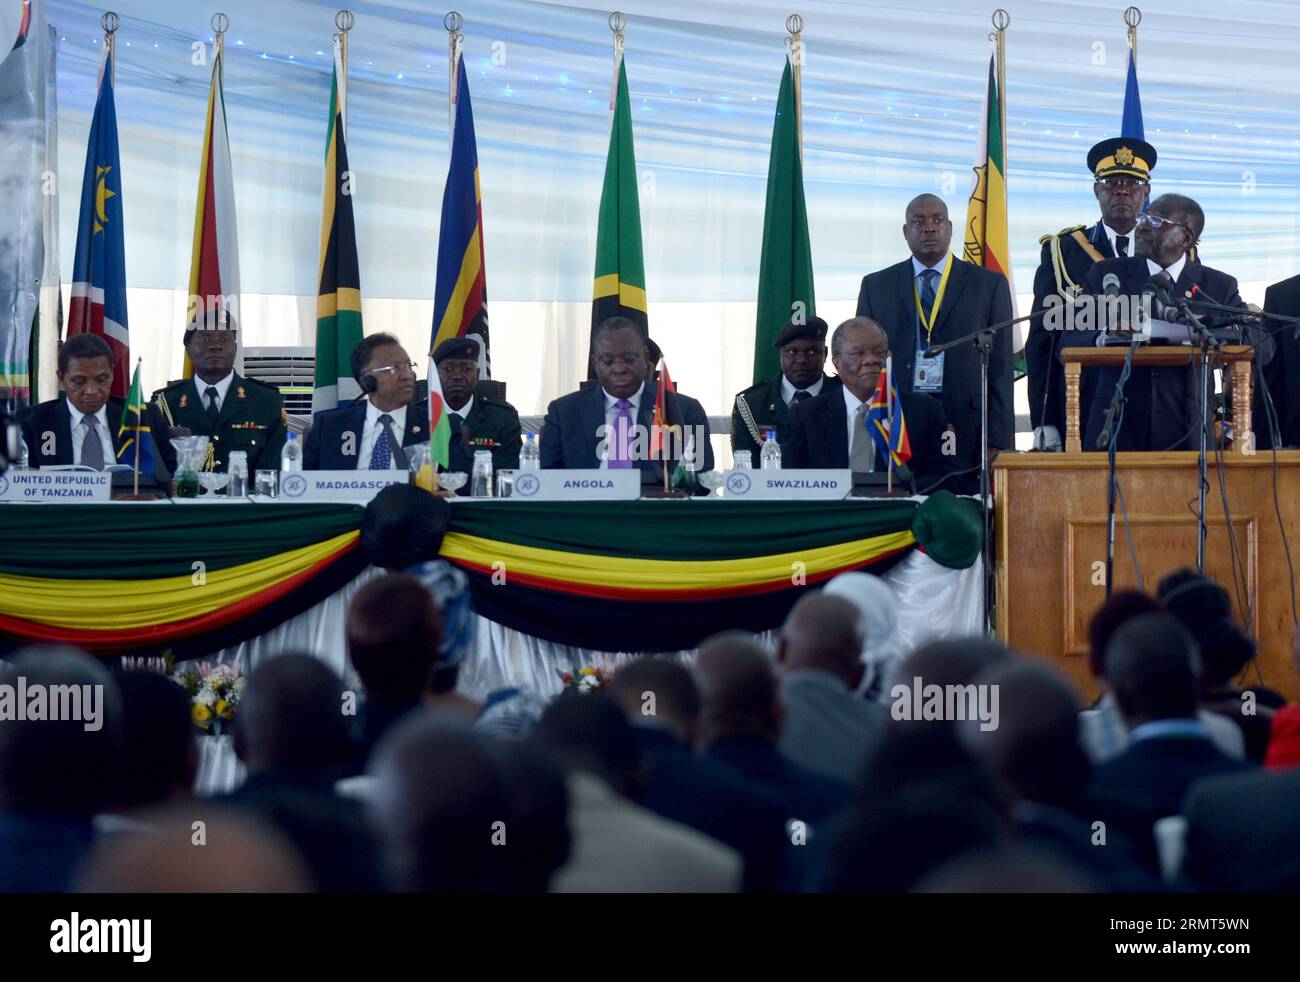 (140817) -- VICTORIA FALLS, Aug. 17, 2014 -- Zimbabwean President Robert Mugabe speaks during the 34th Summit of the Southern African Development Community (SADC) Heads of States and Government in Victoria Falls, north Zimbabwe, Aug. 17, 2014. The meeting opened here Sunday.) (dzl) ZIMBABWE-VICTORIA FALLS-SADC-SUMMIT WangxBo PUBLICATIONxNOTxINxCHN   Victoria Falls Aug 17 2014 Zimbabwean President Robert Mugabe Speaks during The 34th Summit of The Southern African Development Community SADC Heads of States and Government in Victoria Falls North Zimbabwe Aug 17 2014 The Meeting opened Here Sunda Stock Photo